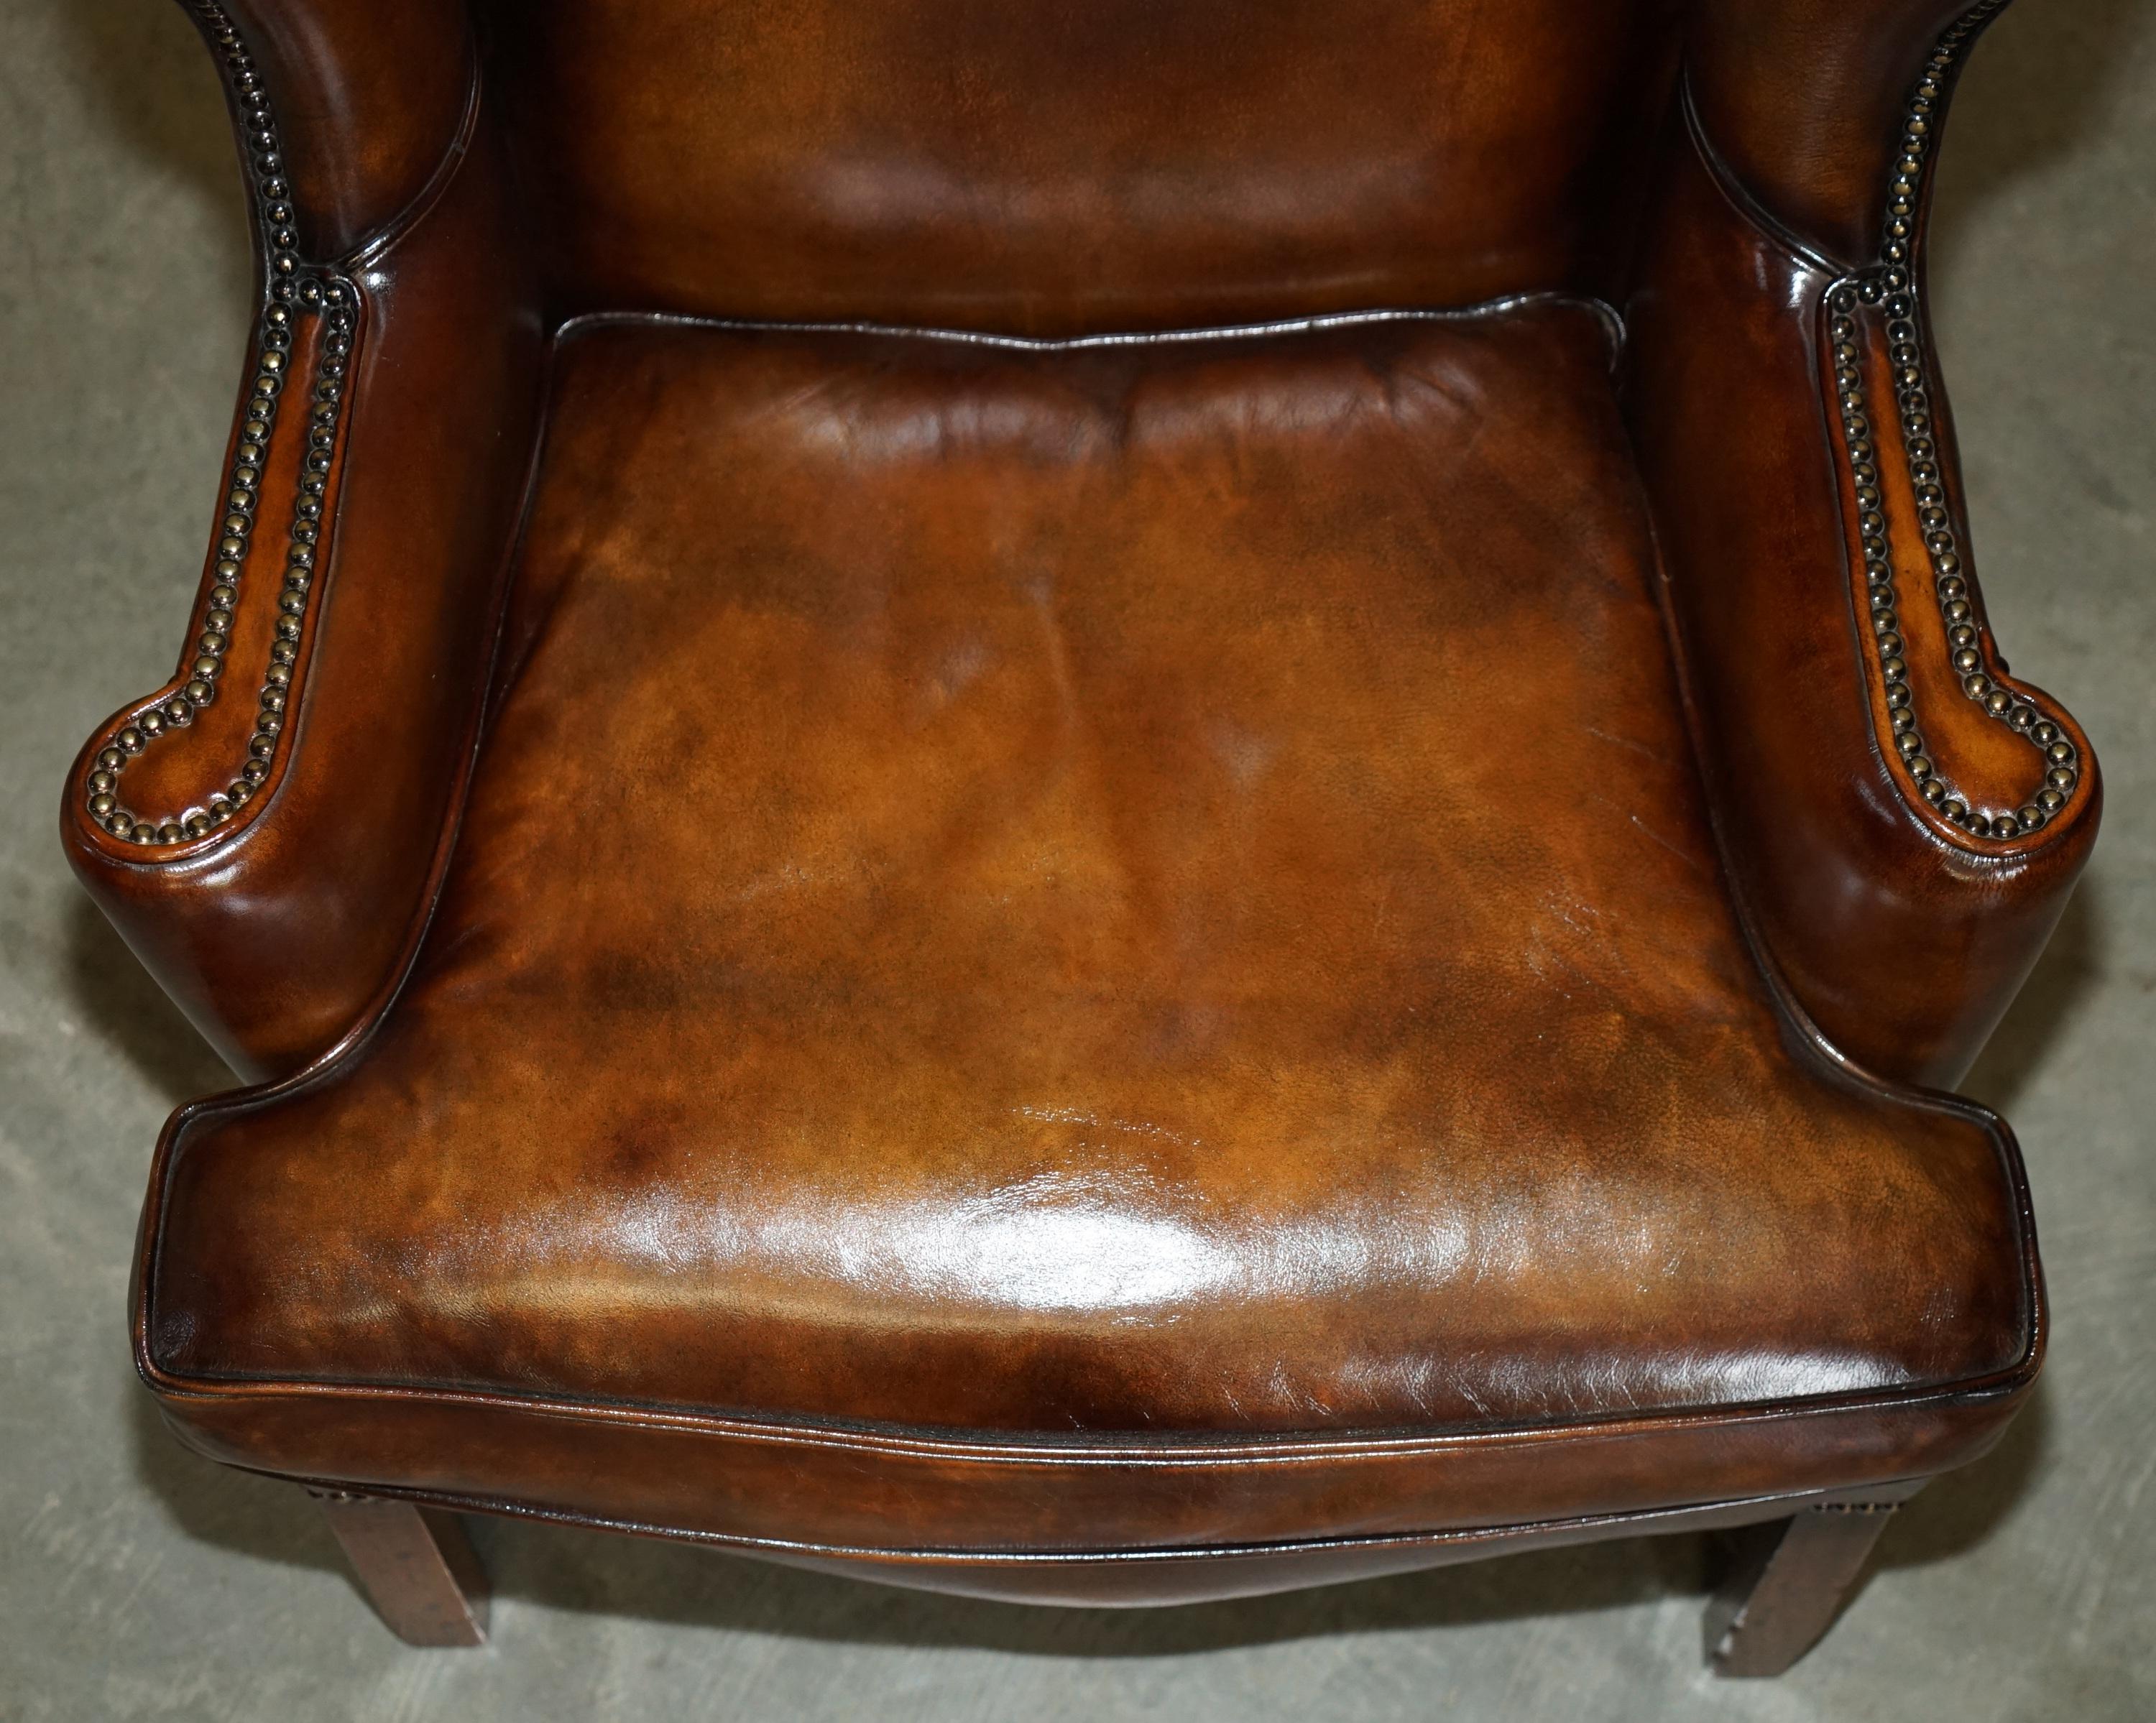 Early 19th Century SUPER FINE RESTORED GEORGE III PERIOD CIRCA 1820 WiNGBACK BROWN LEATHER ARMCHAIR For Sale